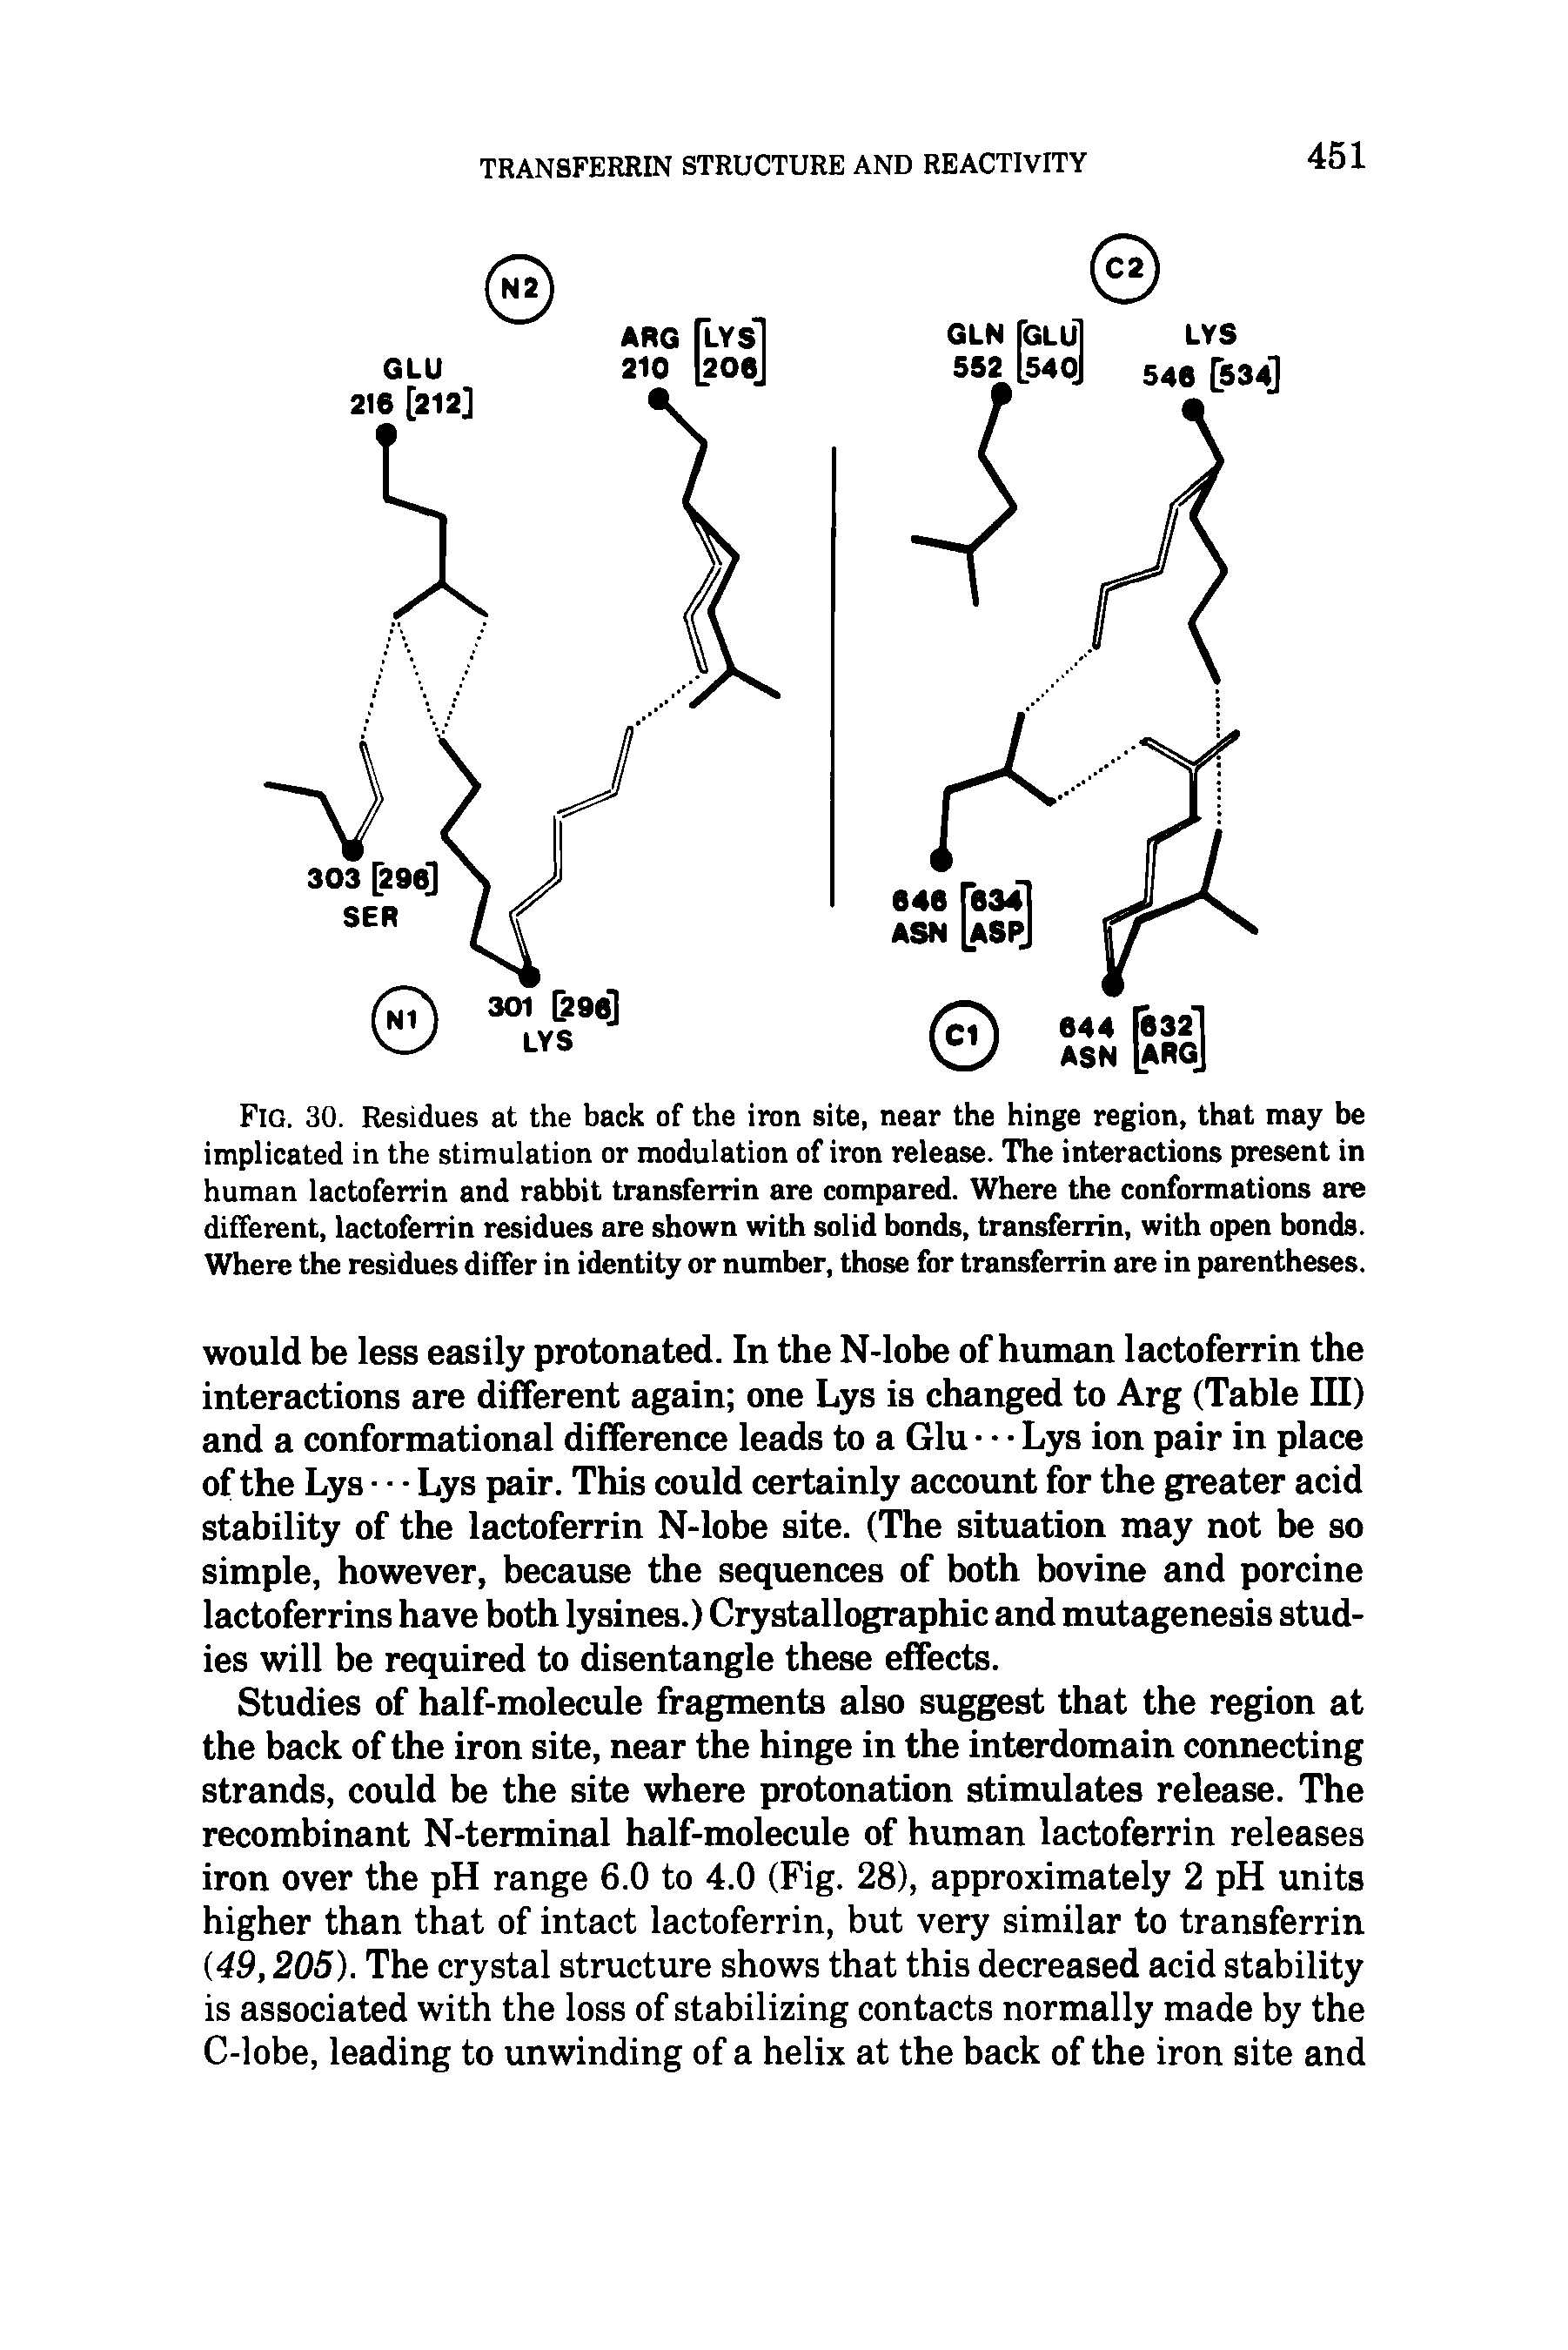 Fig. 30. Residues at the back of the iron site, near the hinge region, that may be implicated in the stimulation or modulation of iron release. The interactions present in human lactoferrin and rabbit transferrin are compared. Where the conformations are different, lactoferrin residues are shown with solid bonds, transferrin, with open bonds. Where the residues differ in identity or number, those for transferrin are in parentheses.